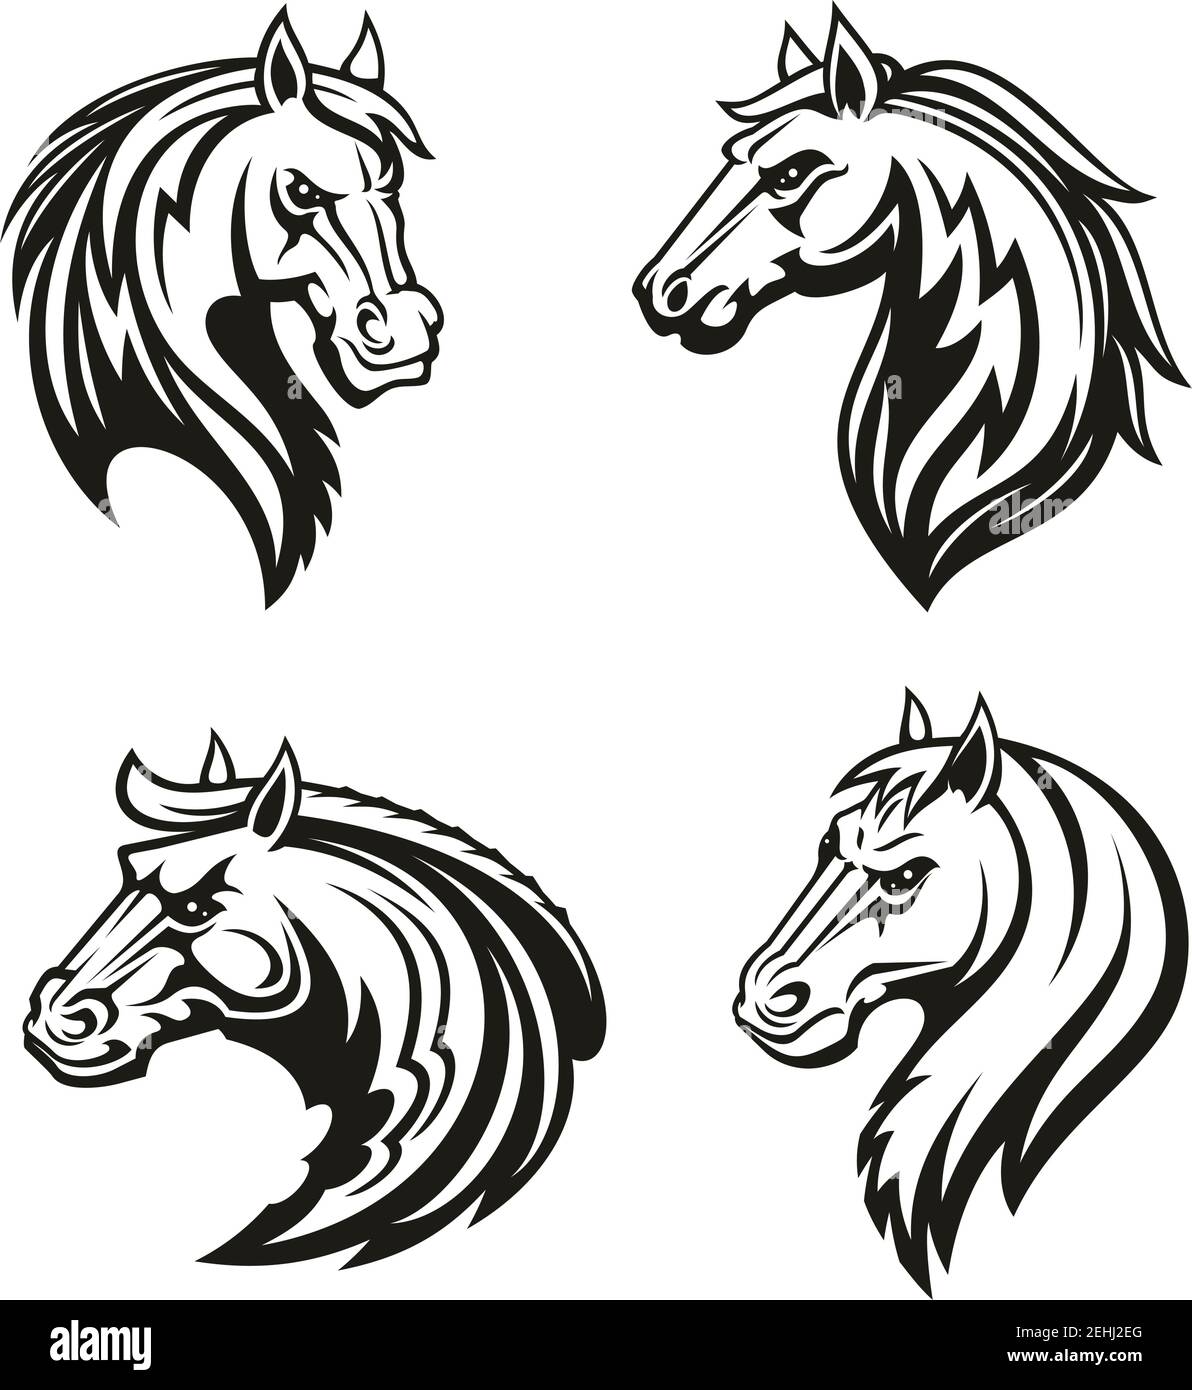 580 Silhouette Of A Wild Horse Tattoo Illustrations RoyaltyFree Vector  Graphics  Clip Art  iStock